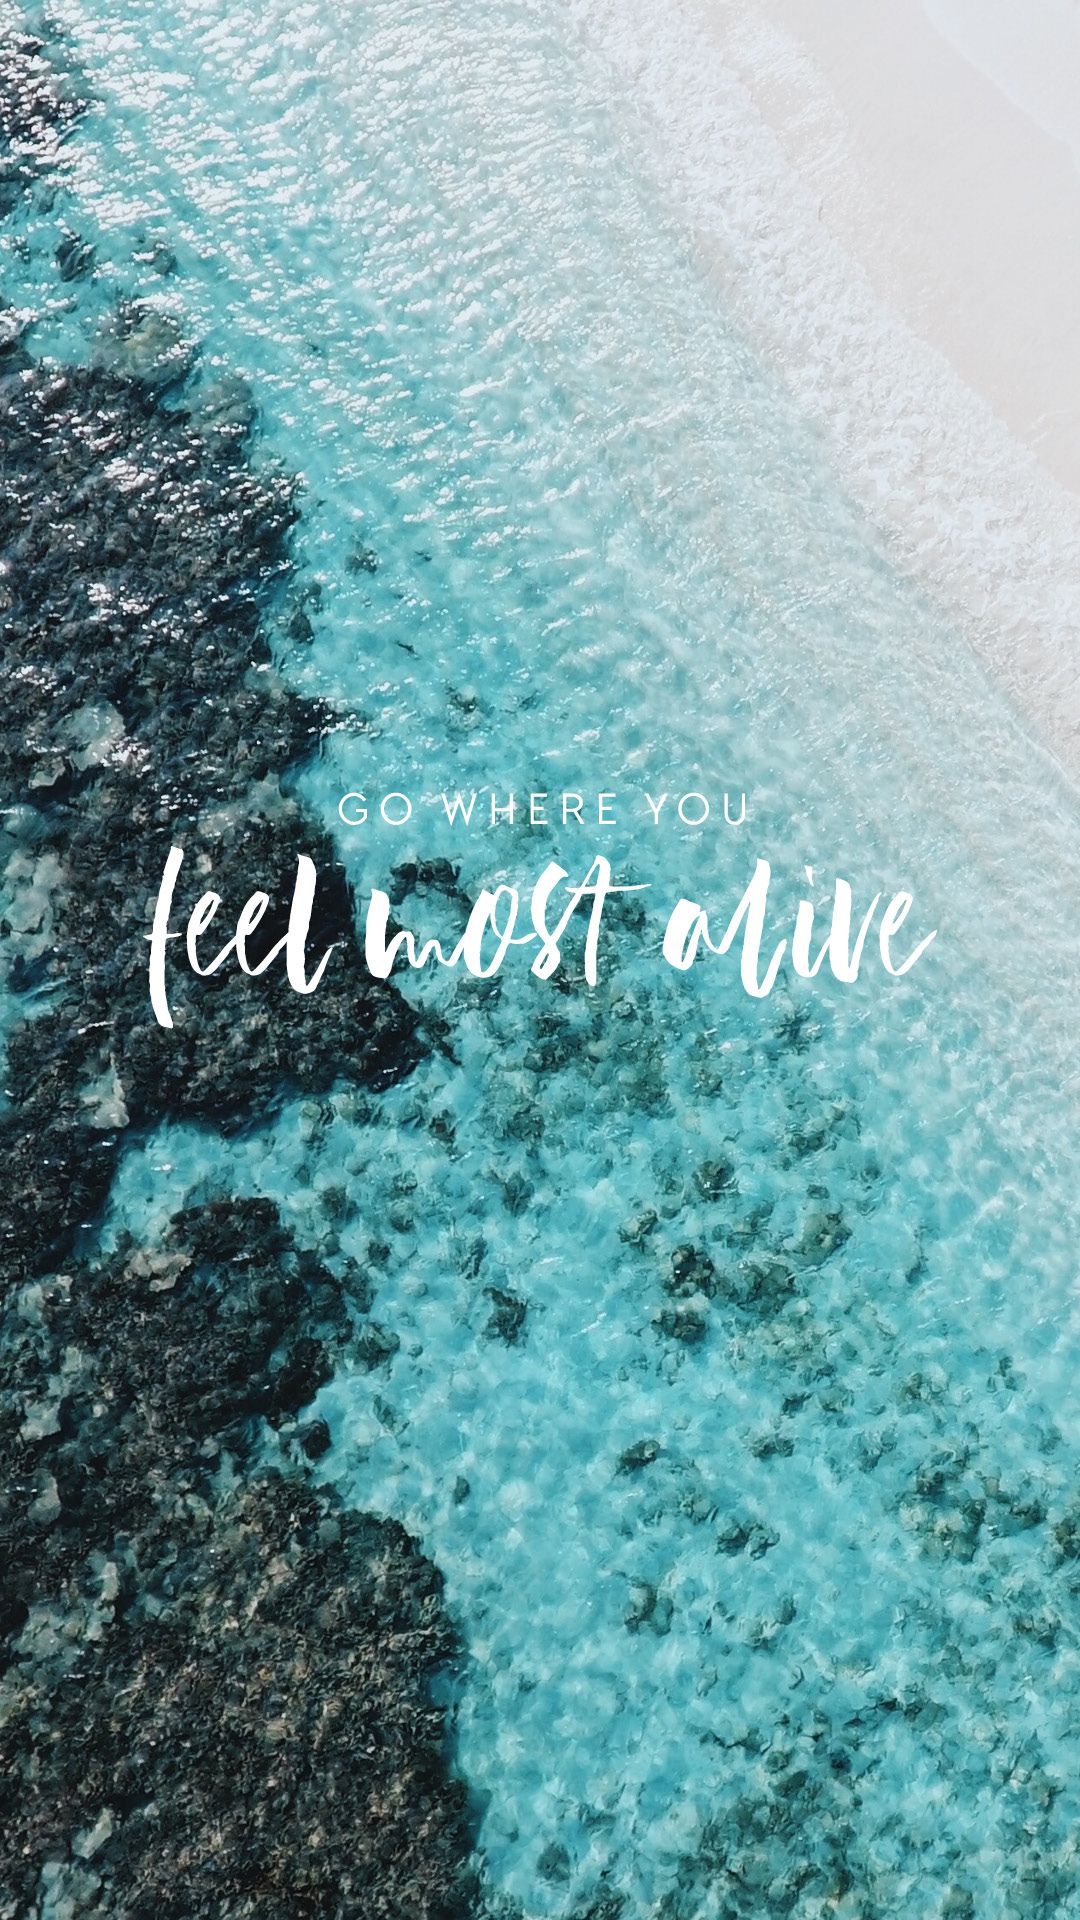 Beach Quotes Wallpapers